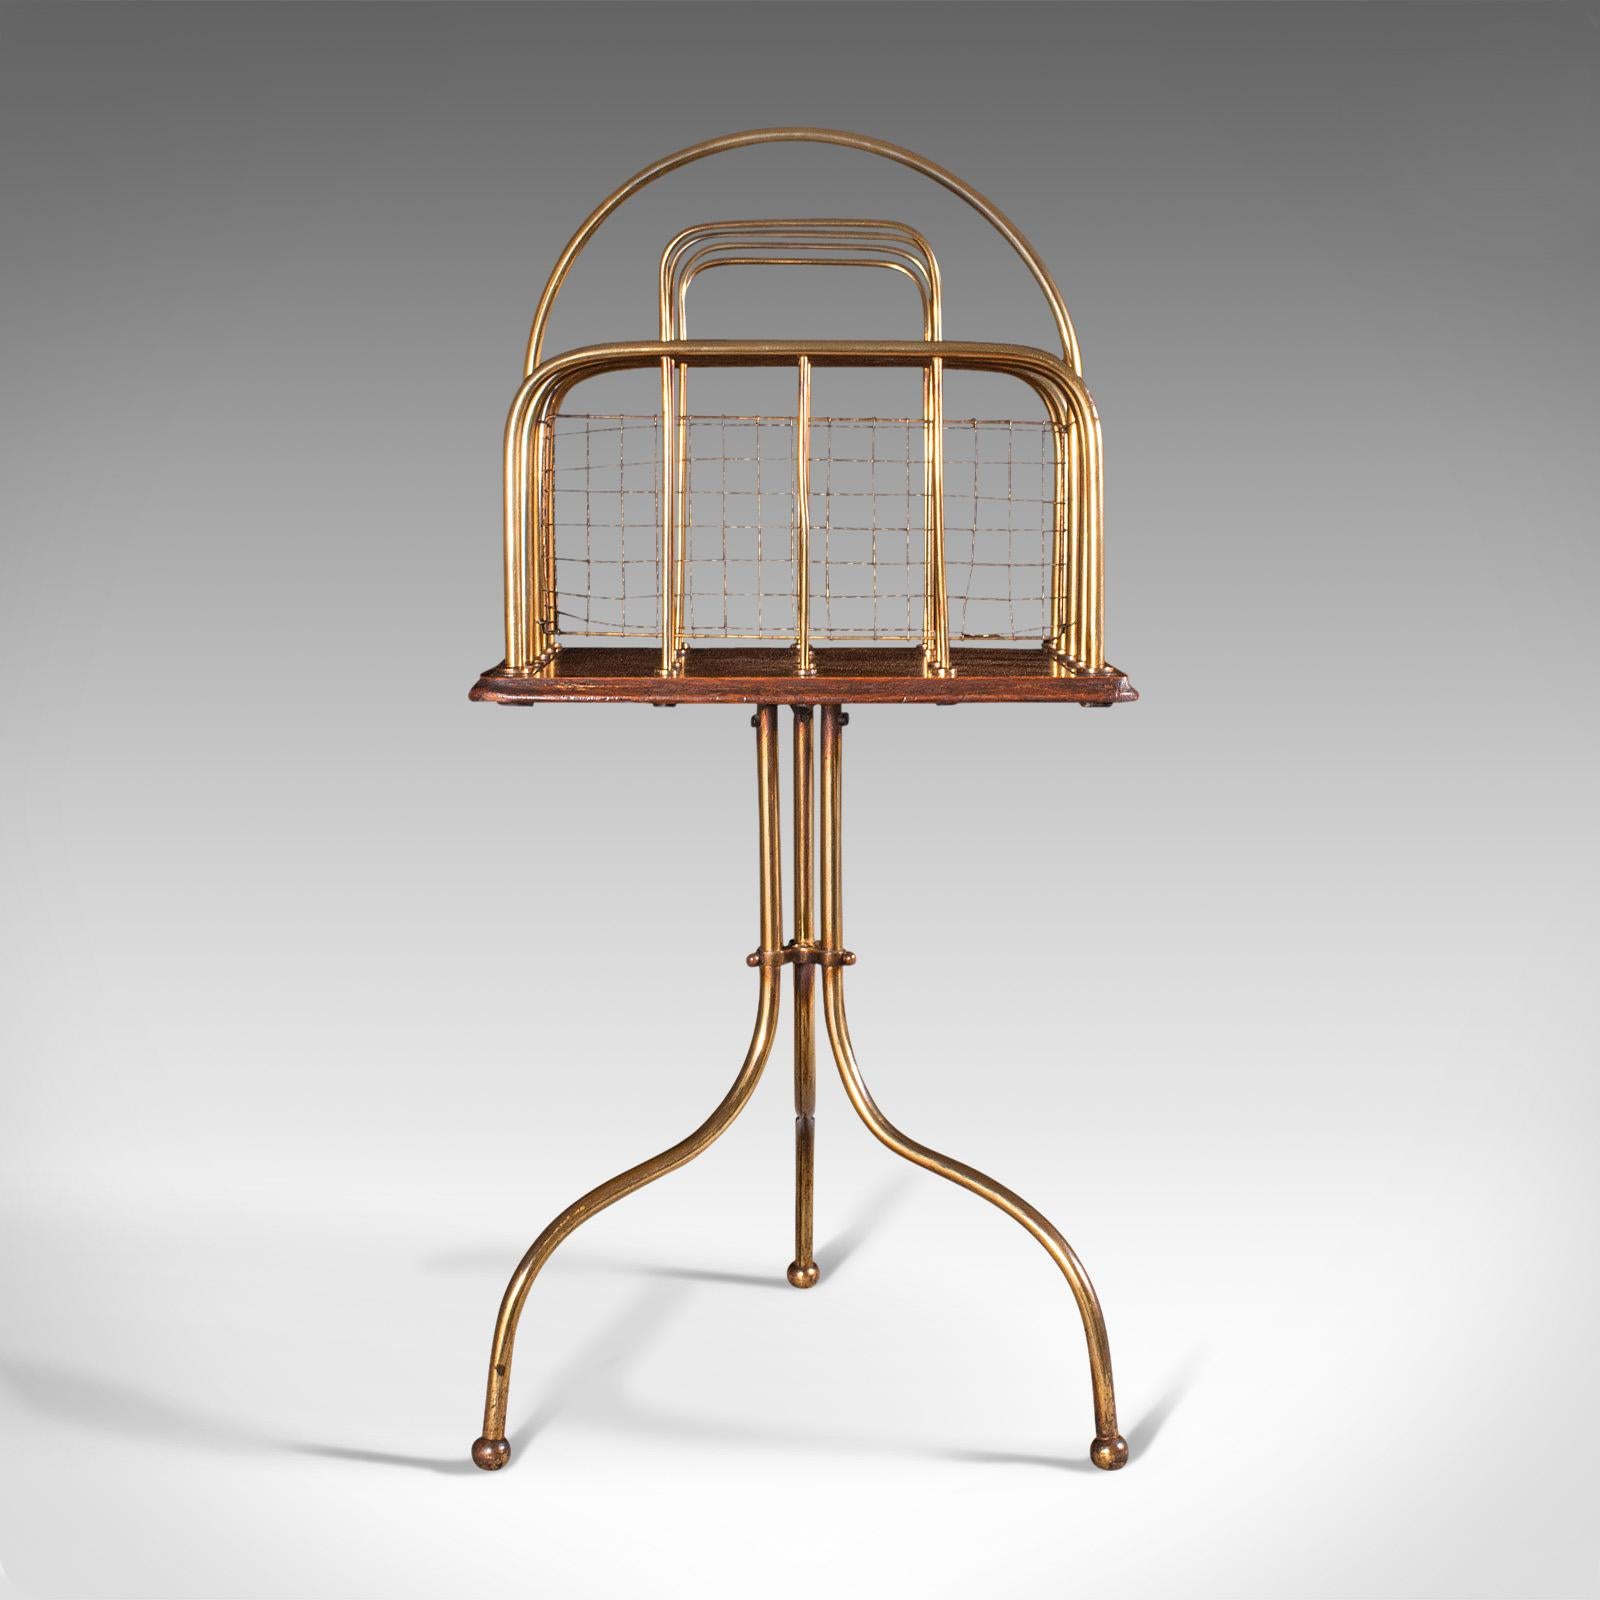 This is an antique newspaper rack. A French, oak and brassed alloy magazine or music stand, dating to the late Victorian period, circa 1900.

Striking rack with great hues and sinuous forms
Displaying a desirable aged patina and in good